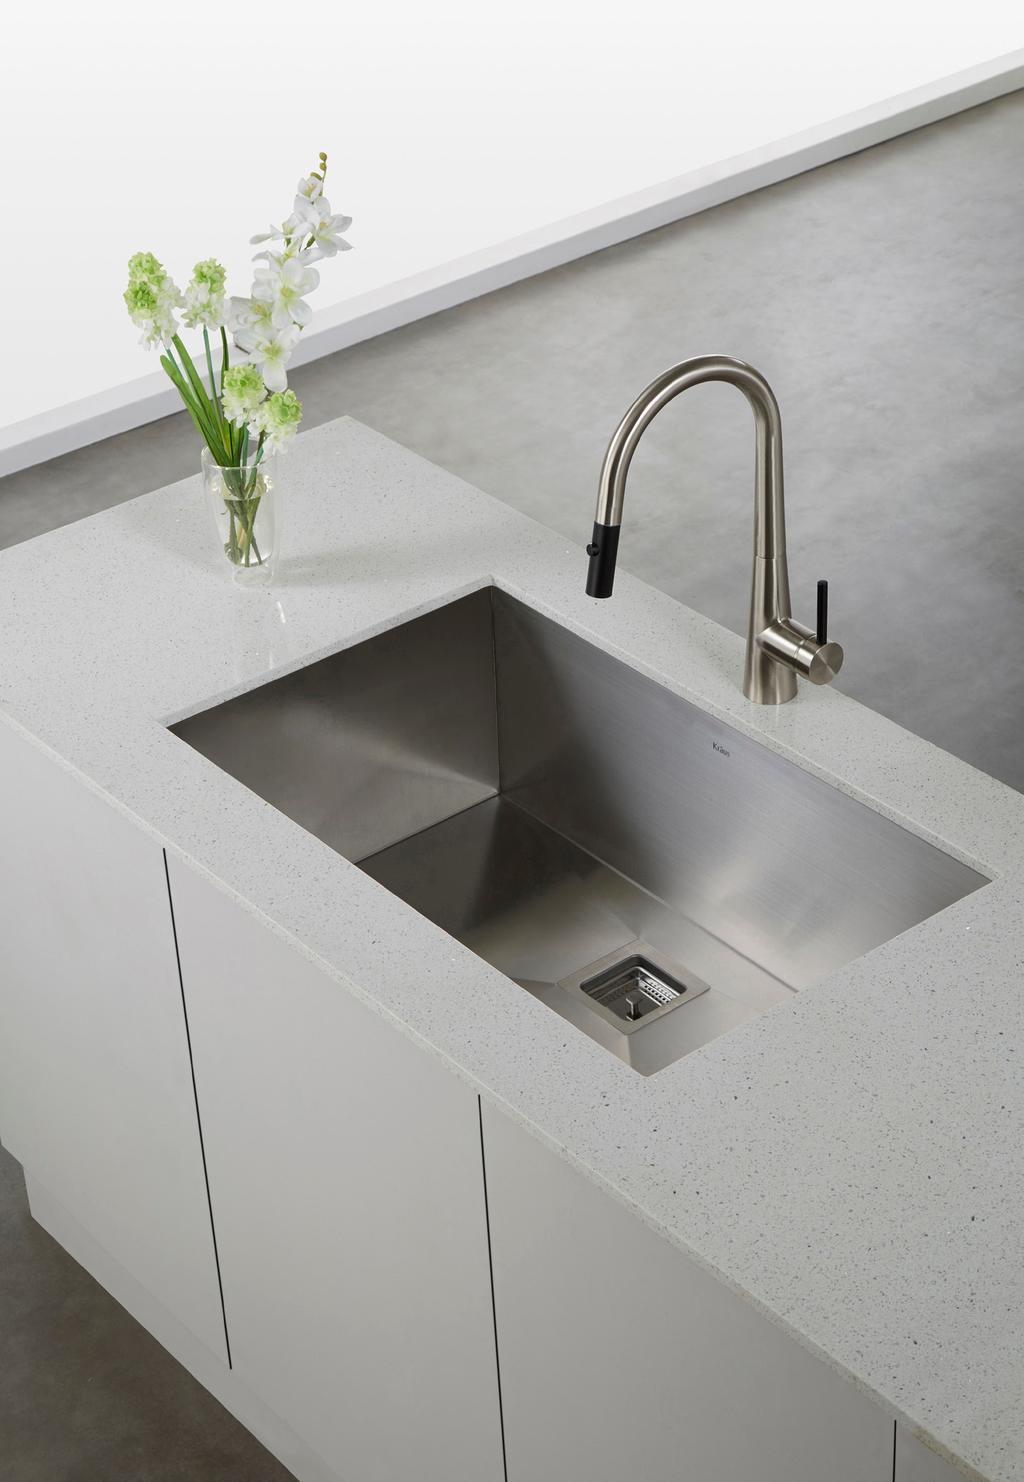 KRAUS INTRODUCES A NEW SERIES OF ZERO-RADIUS KITCHEN SINKS Build A Better Kitchen With Restaurant-Style Stainless Steel Sinks 10/2015 Port Washington, NY 02 Kraus is introducing a stylish and